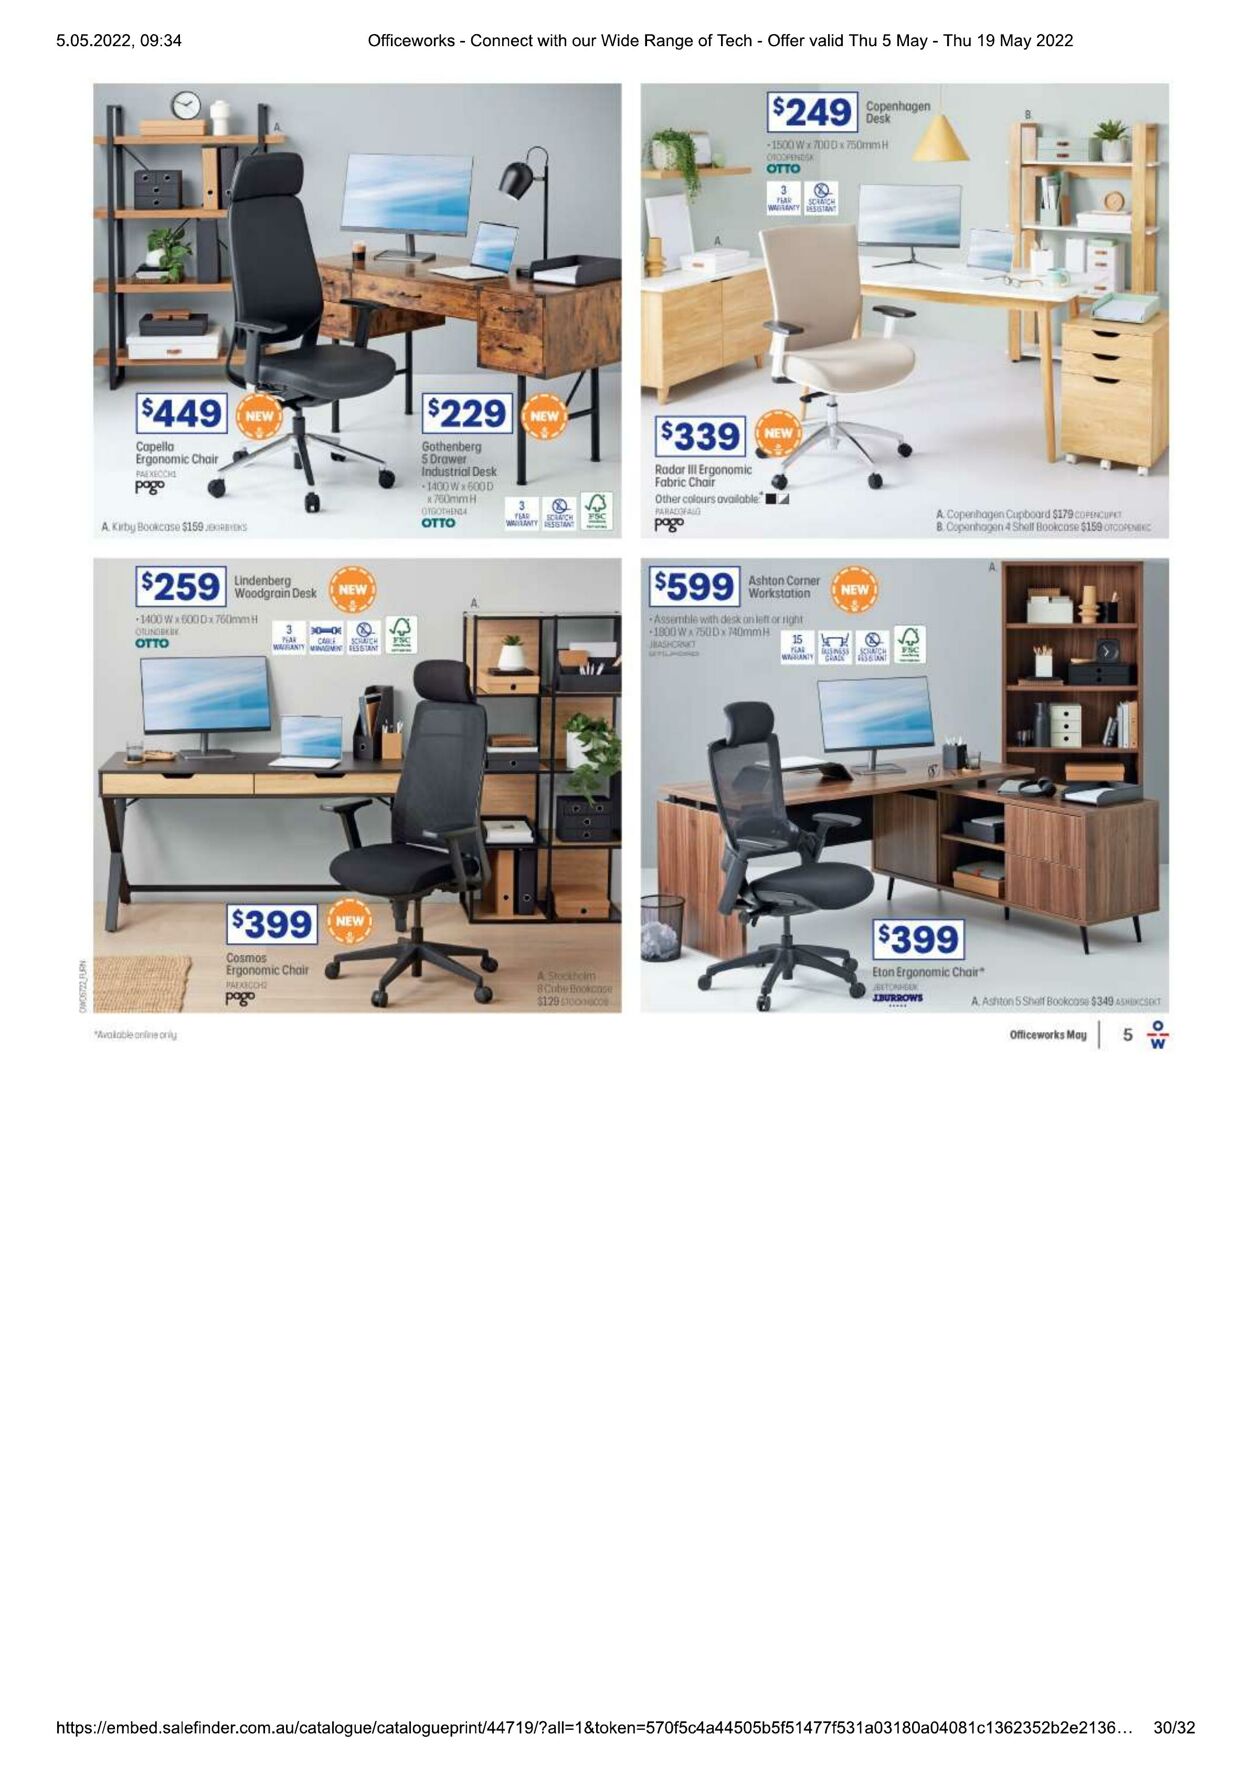 Catalogue Officeworks 05.05.2022 - 19.05.2022